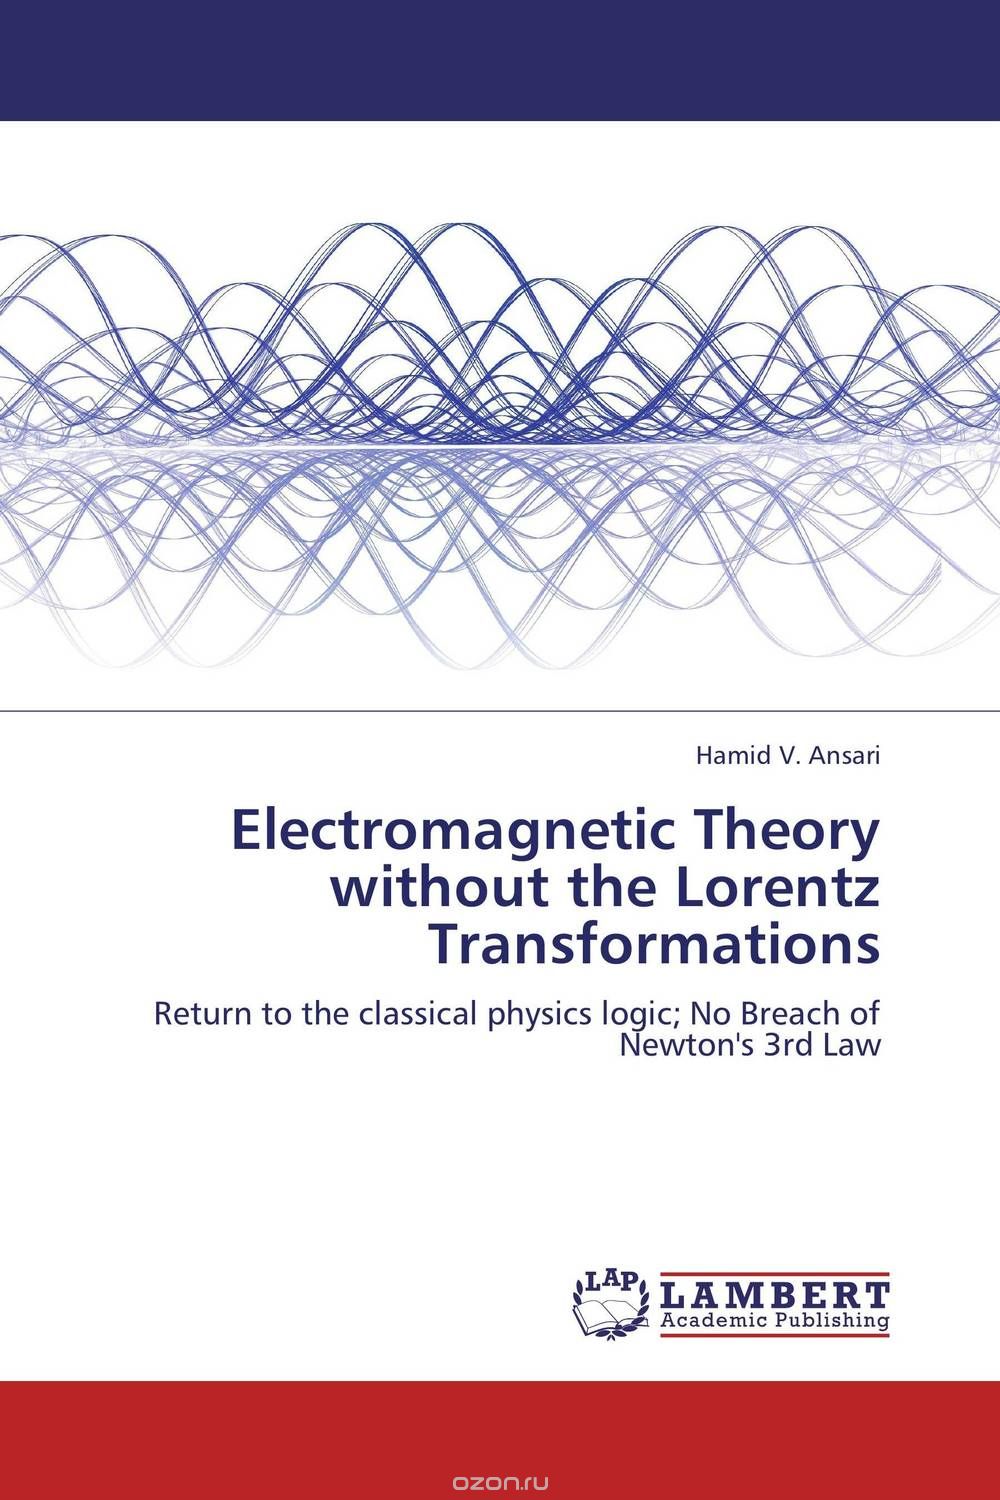 Electromagnetic Theory without the Lorentz Transformations